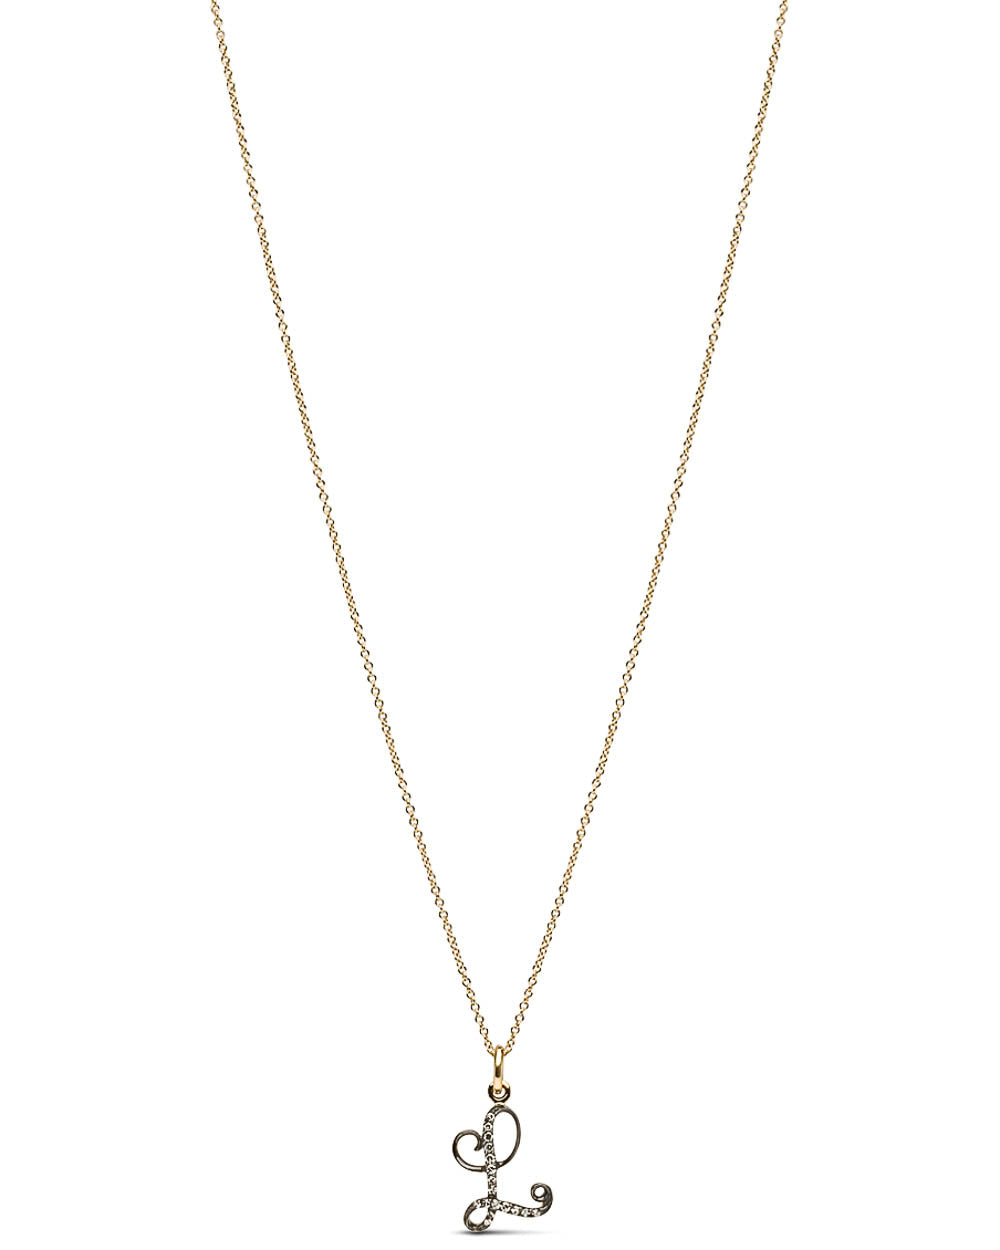 Gold and Silver Diamond Initial L Pendant Necklace